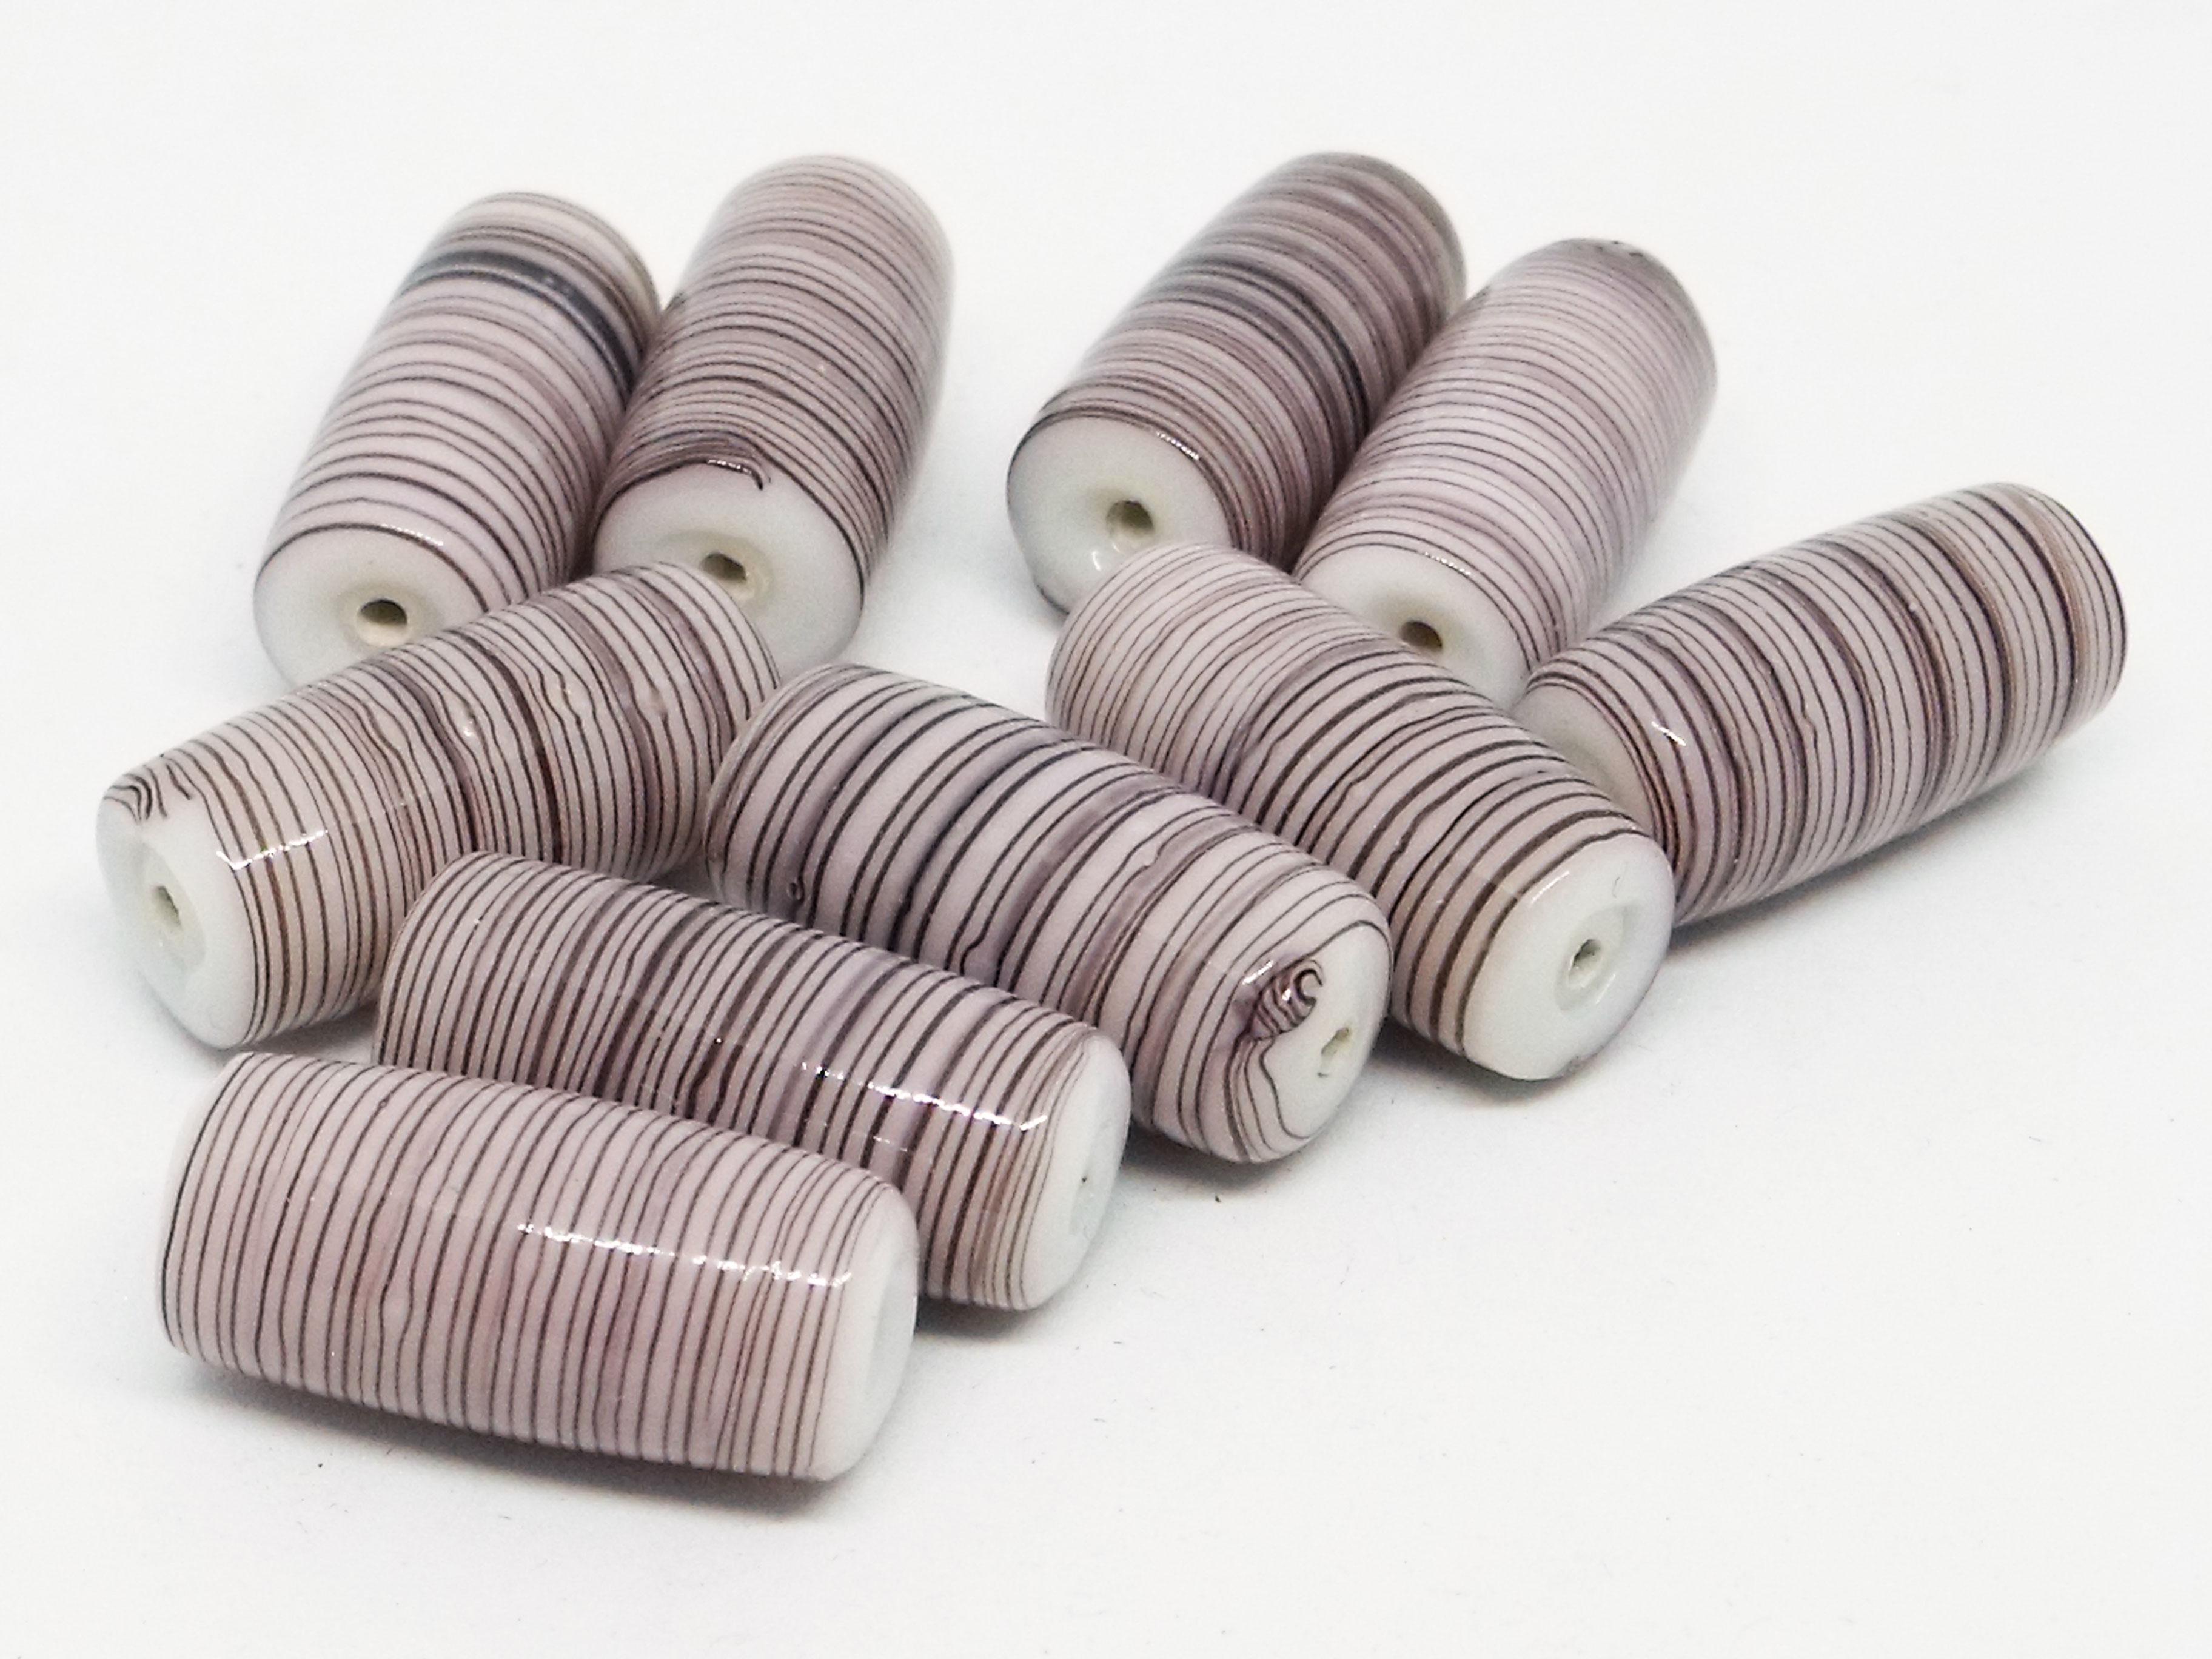 20x10mm Glass Tube Bead - White Base with Purple and Black Stripes